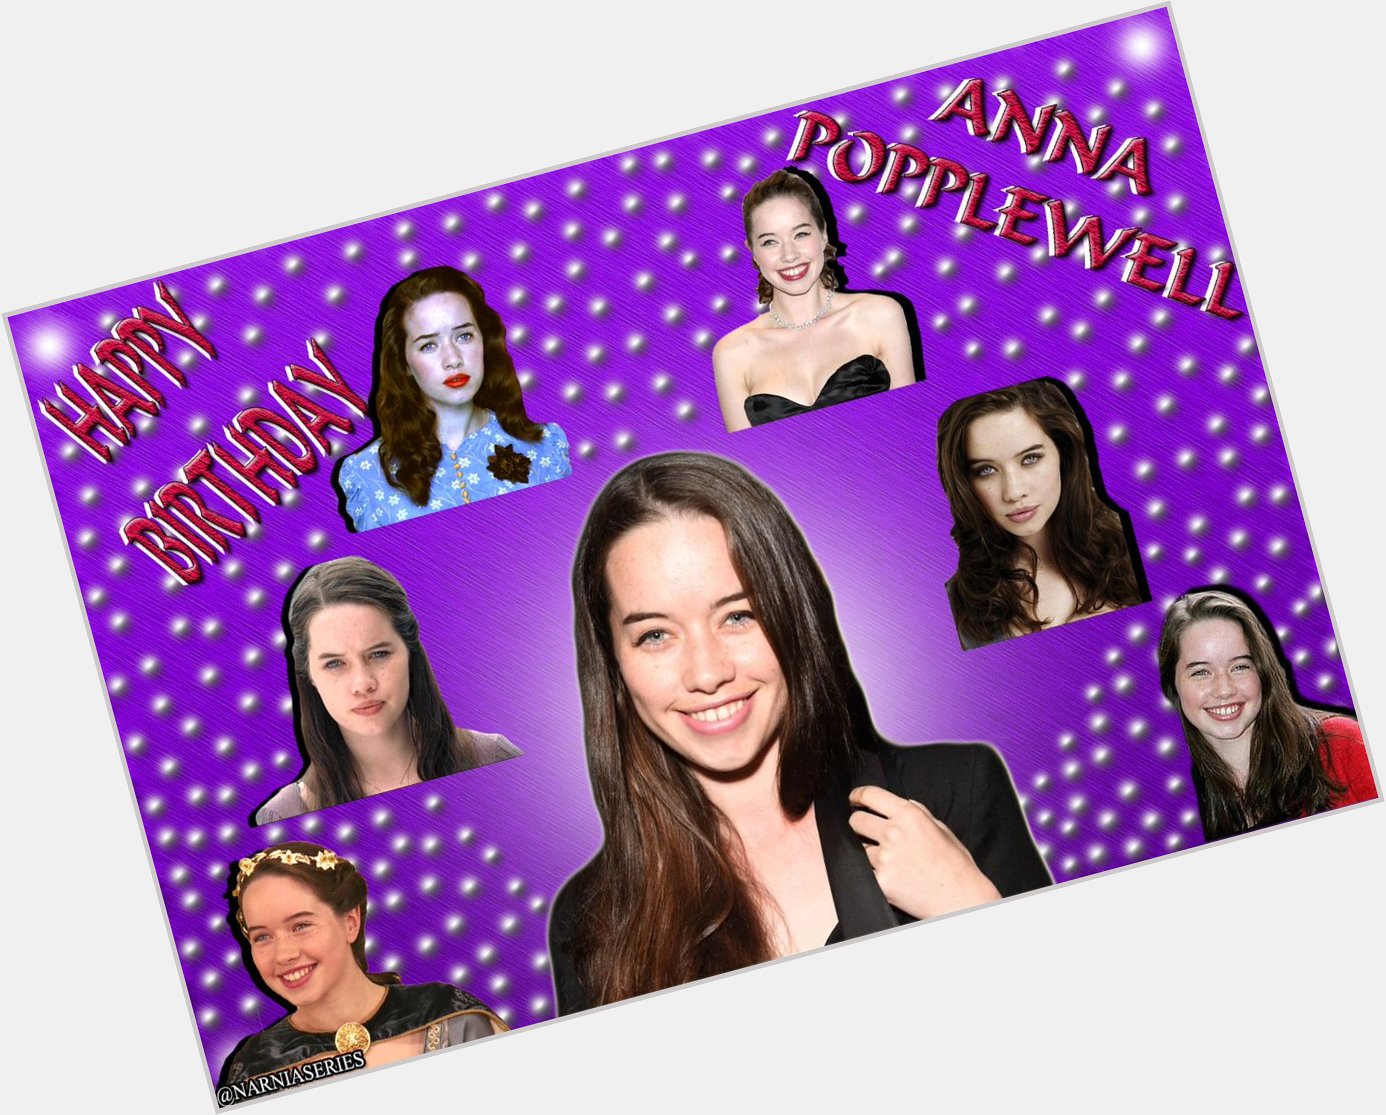 Happy Birthday to our, Queen Susan Pevensie the Gentle, Anna Popplewell!            